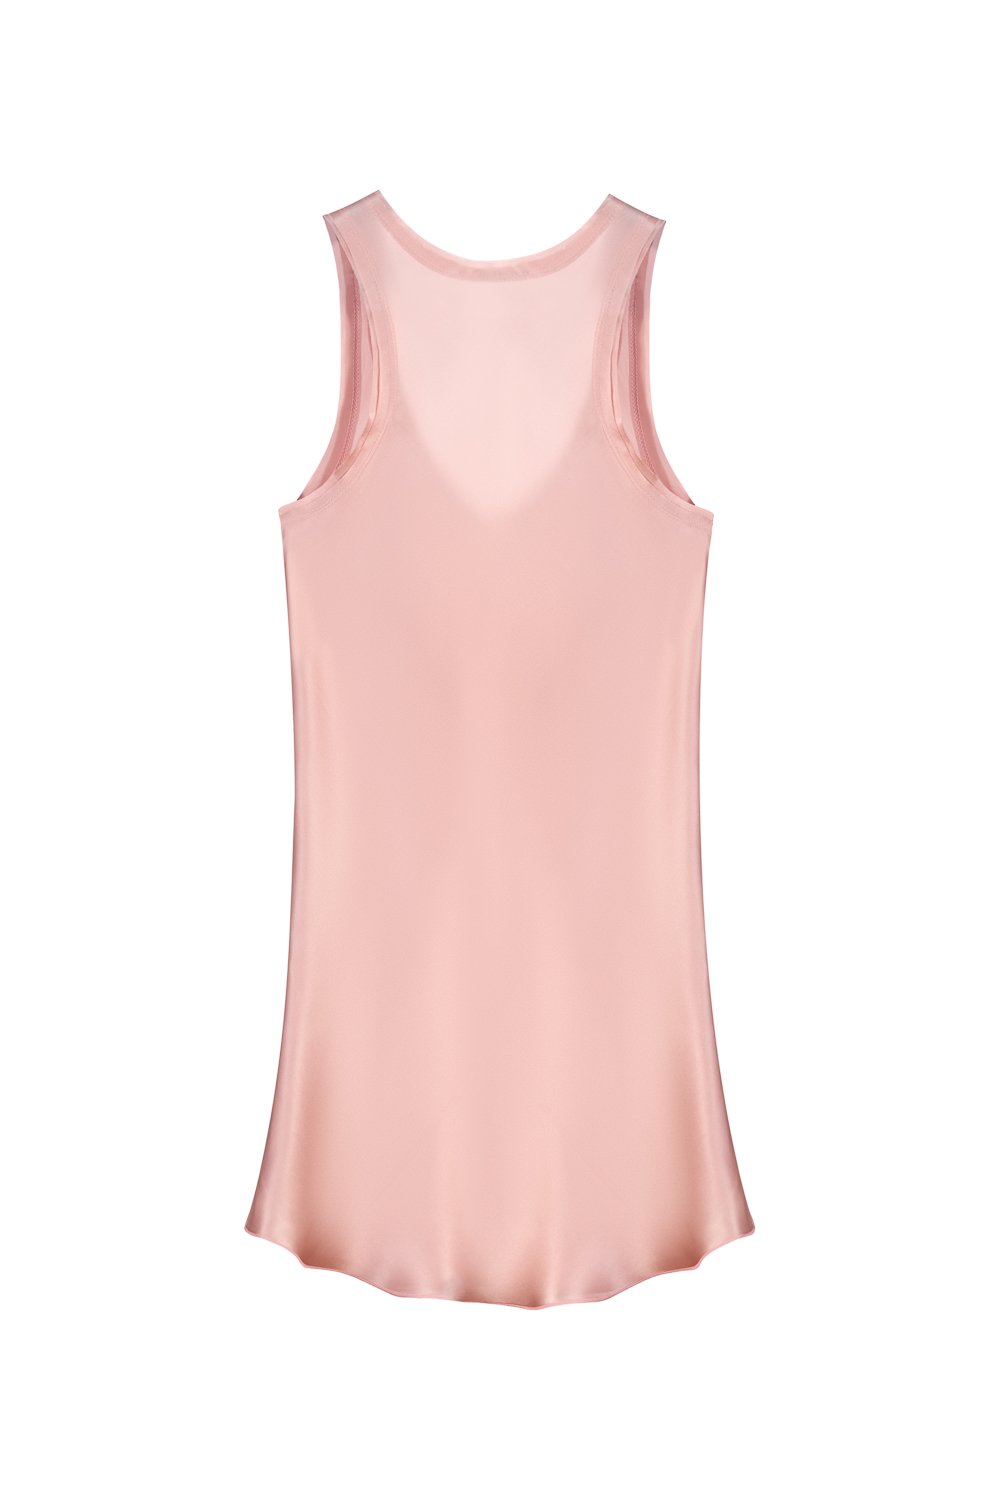 Silk Tank Top in Shell Pink